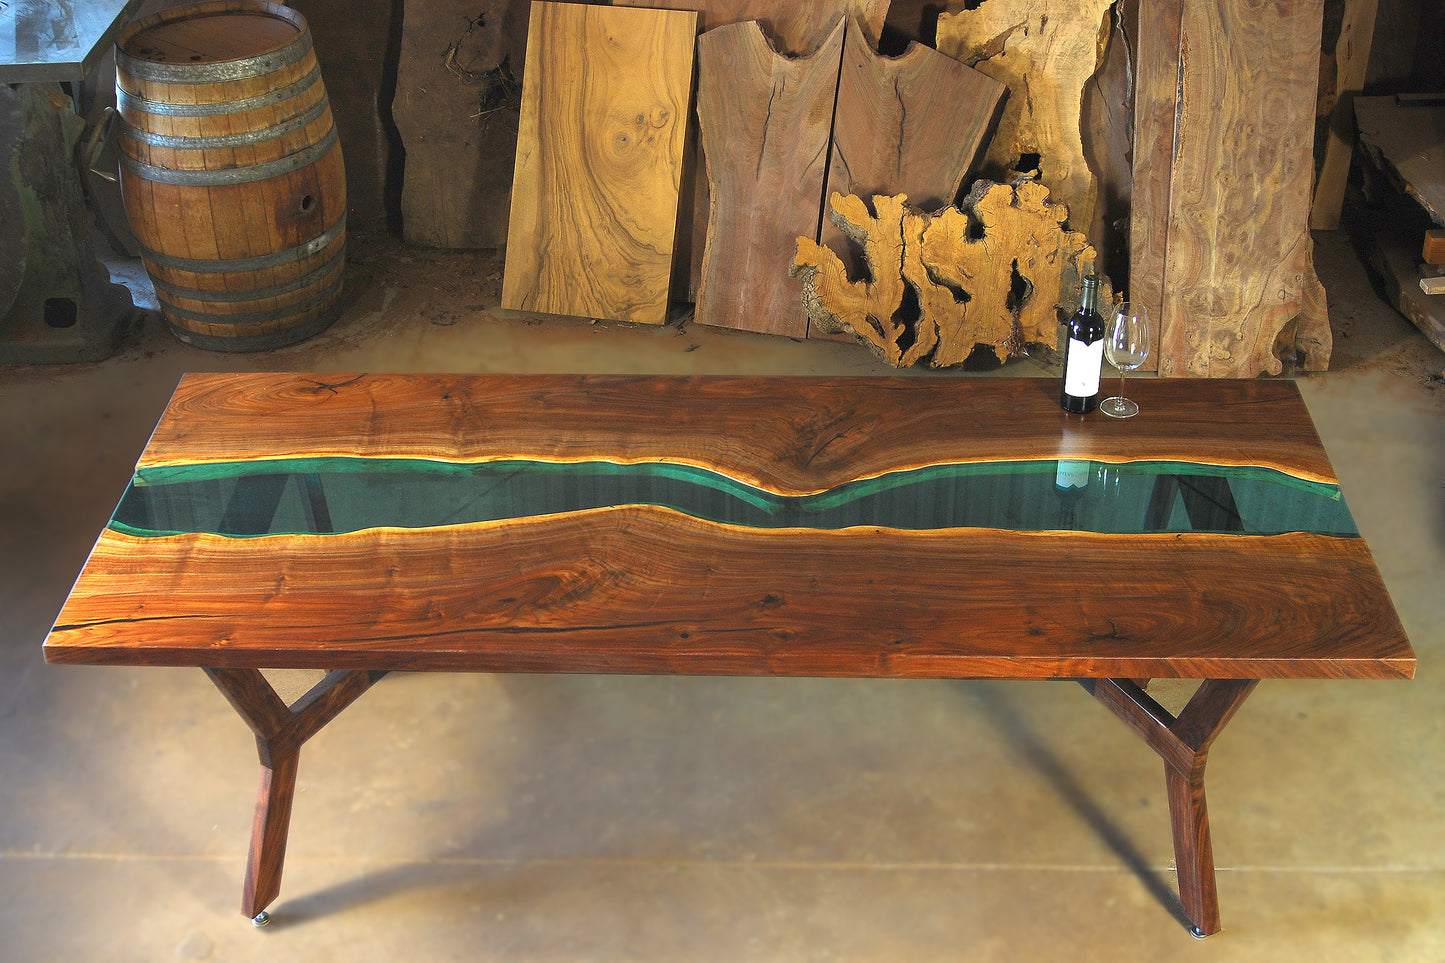 Glass river table